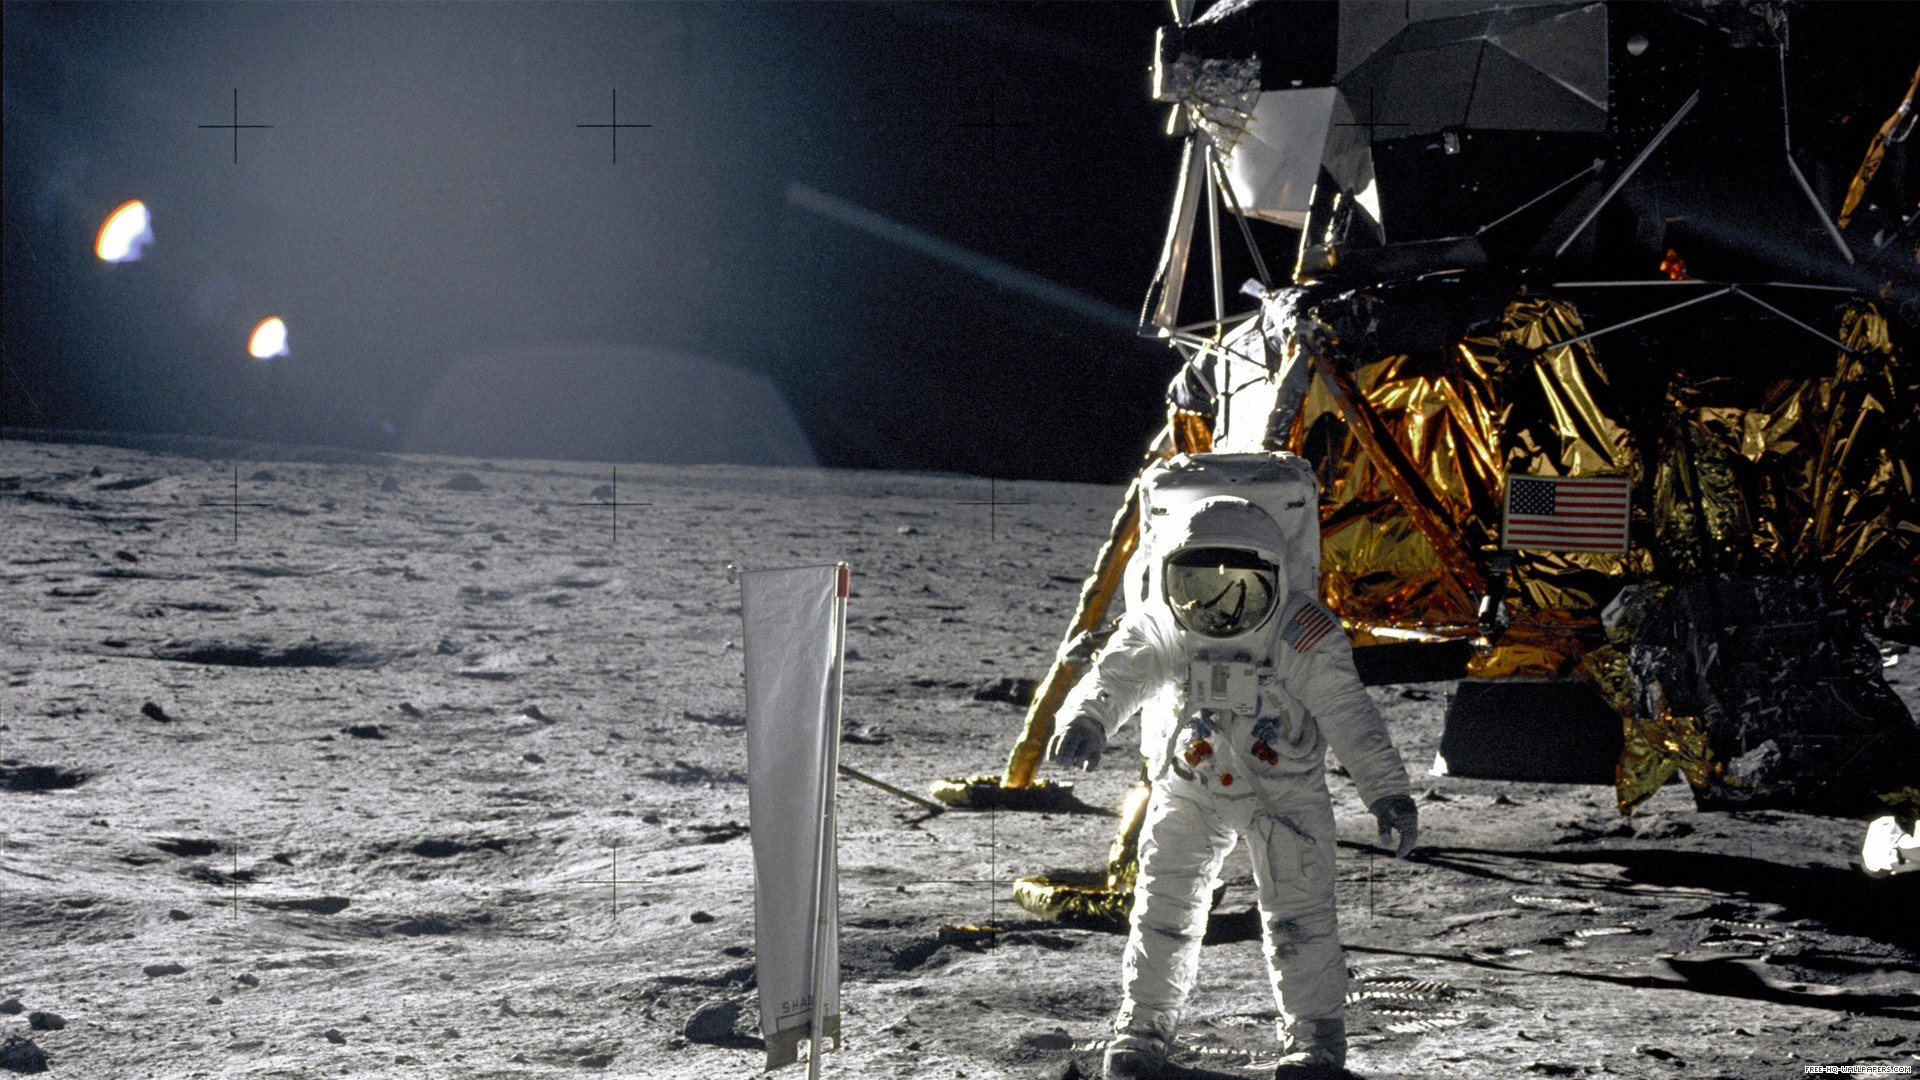 1. A Round Trip To The Moon - A group called Golden Spike is setting in place citizen visits to the moon, and you can go for only $750 million! For 1.5 billion you can actually walk on the moon, but that would be above your campaign funds.